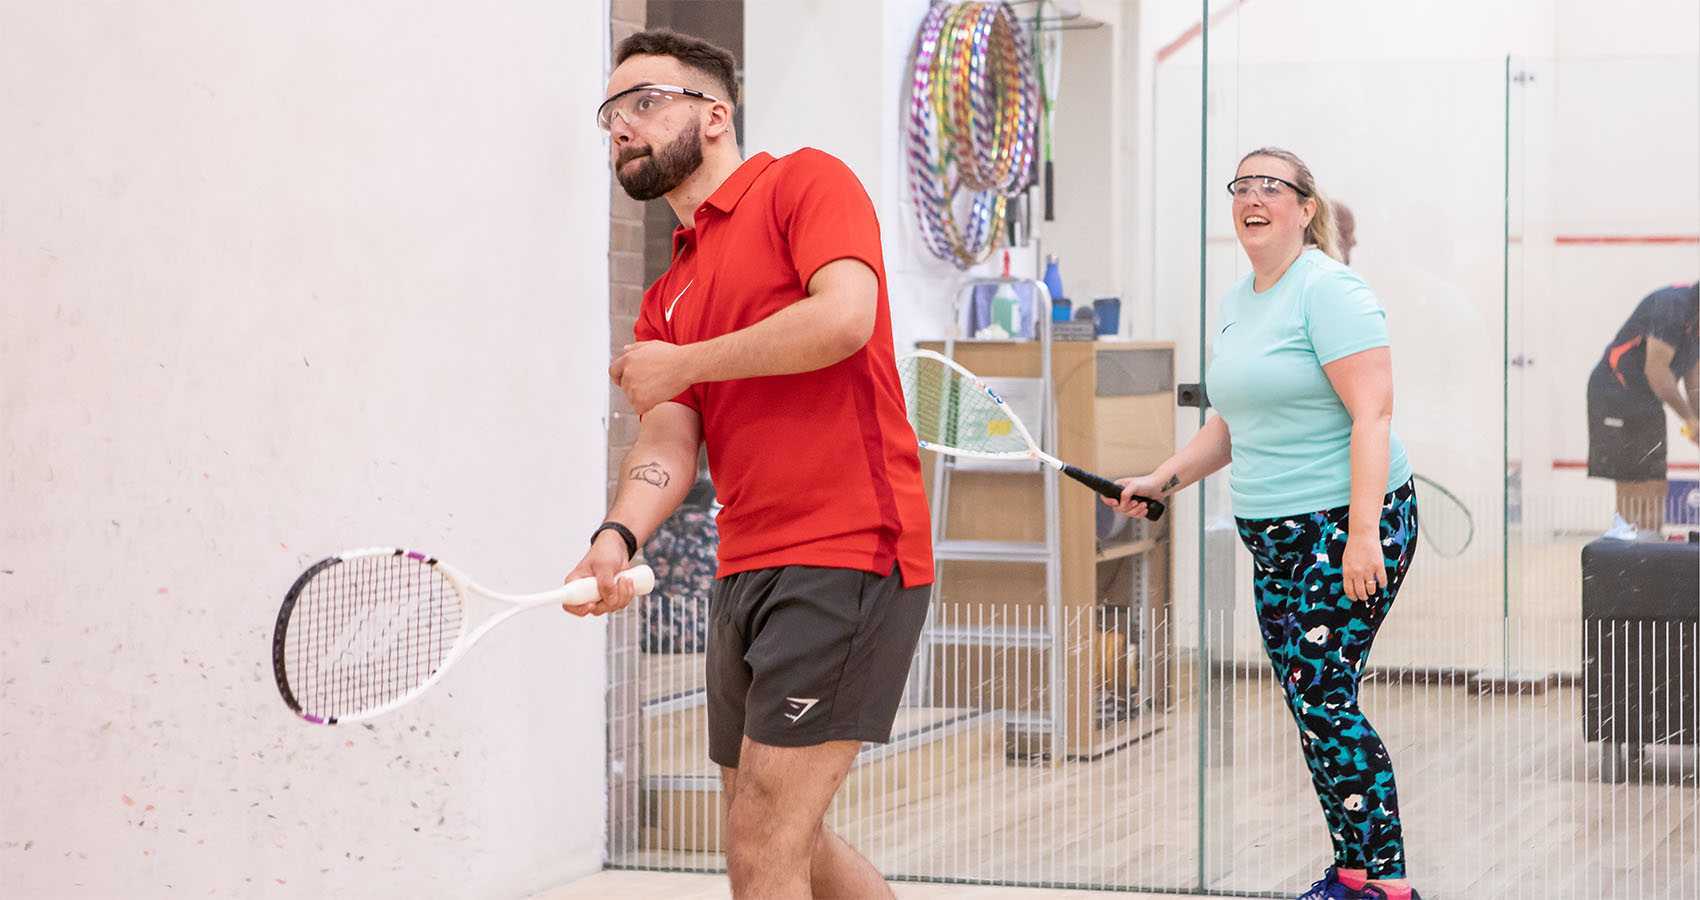 A male and female player playing squash on court